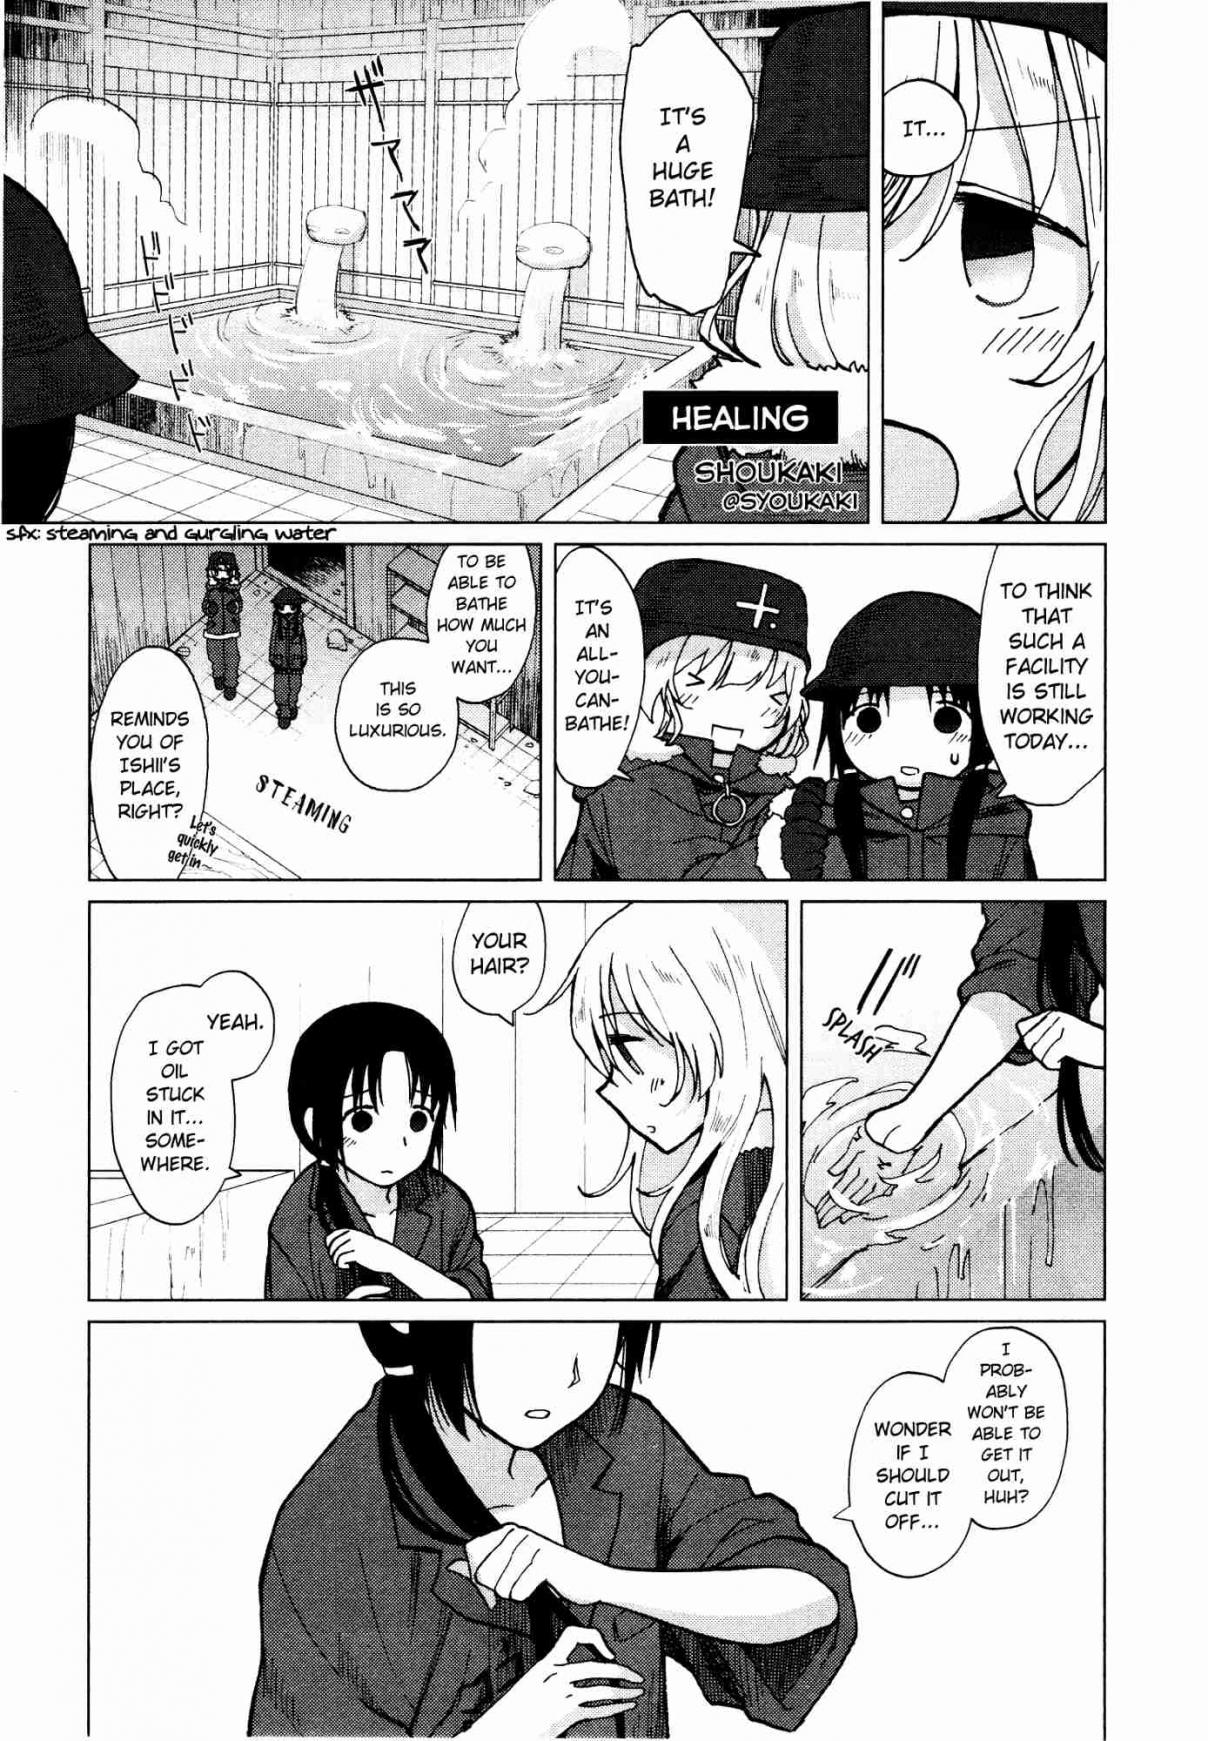 Girls' Last Tour Official Anthology Comic Vol. 1 Ch. 16 Healing by Shoukaki